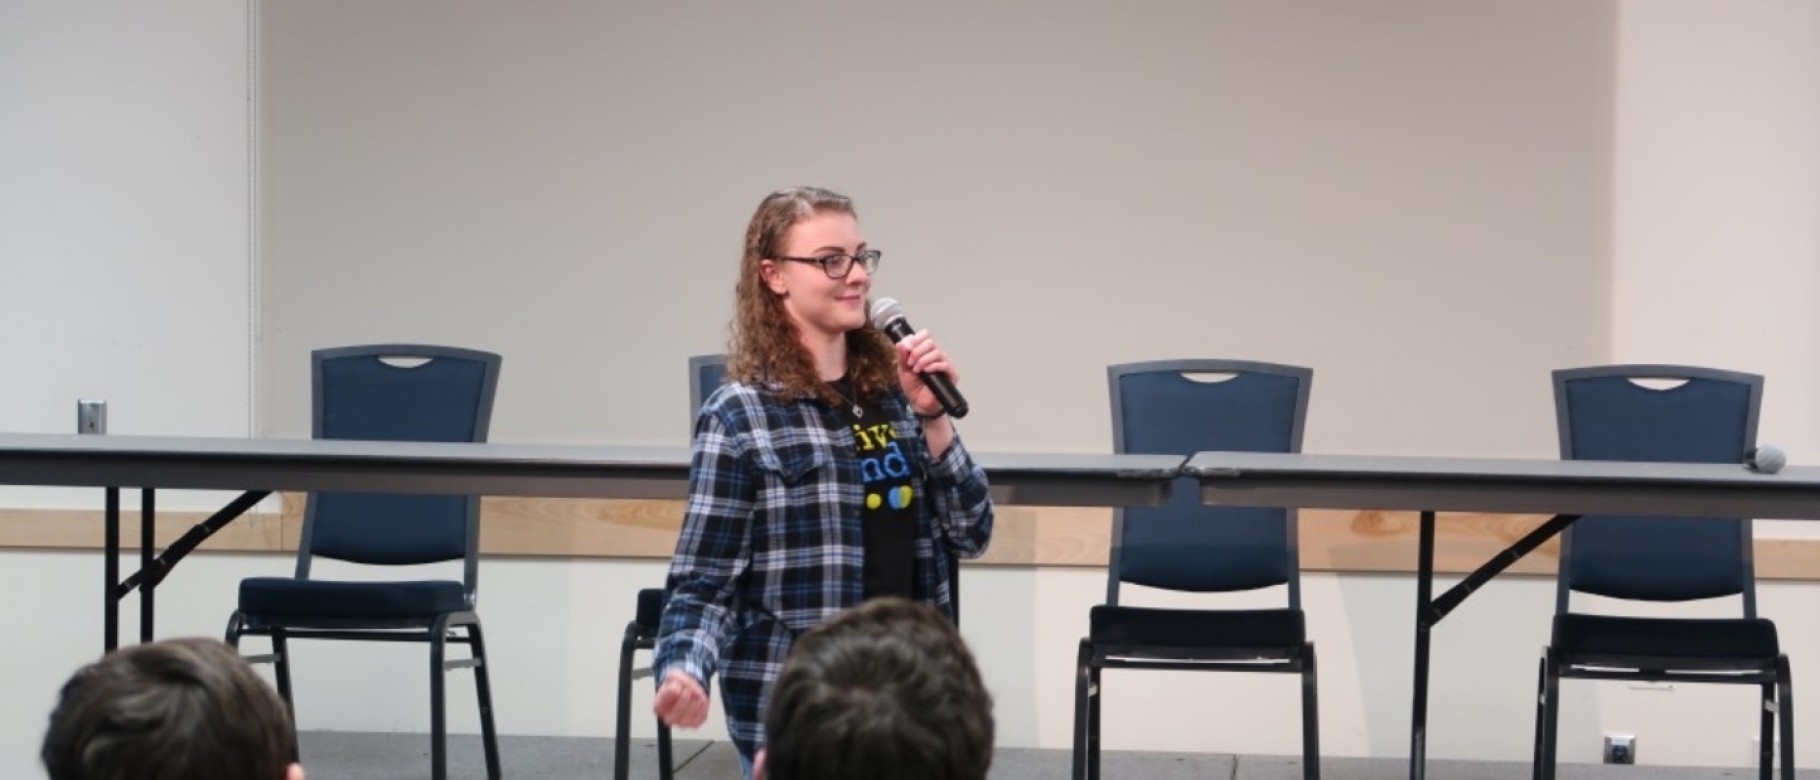 Sydney Wolf leads a discussion at an Active Minds event in 2019